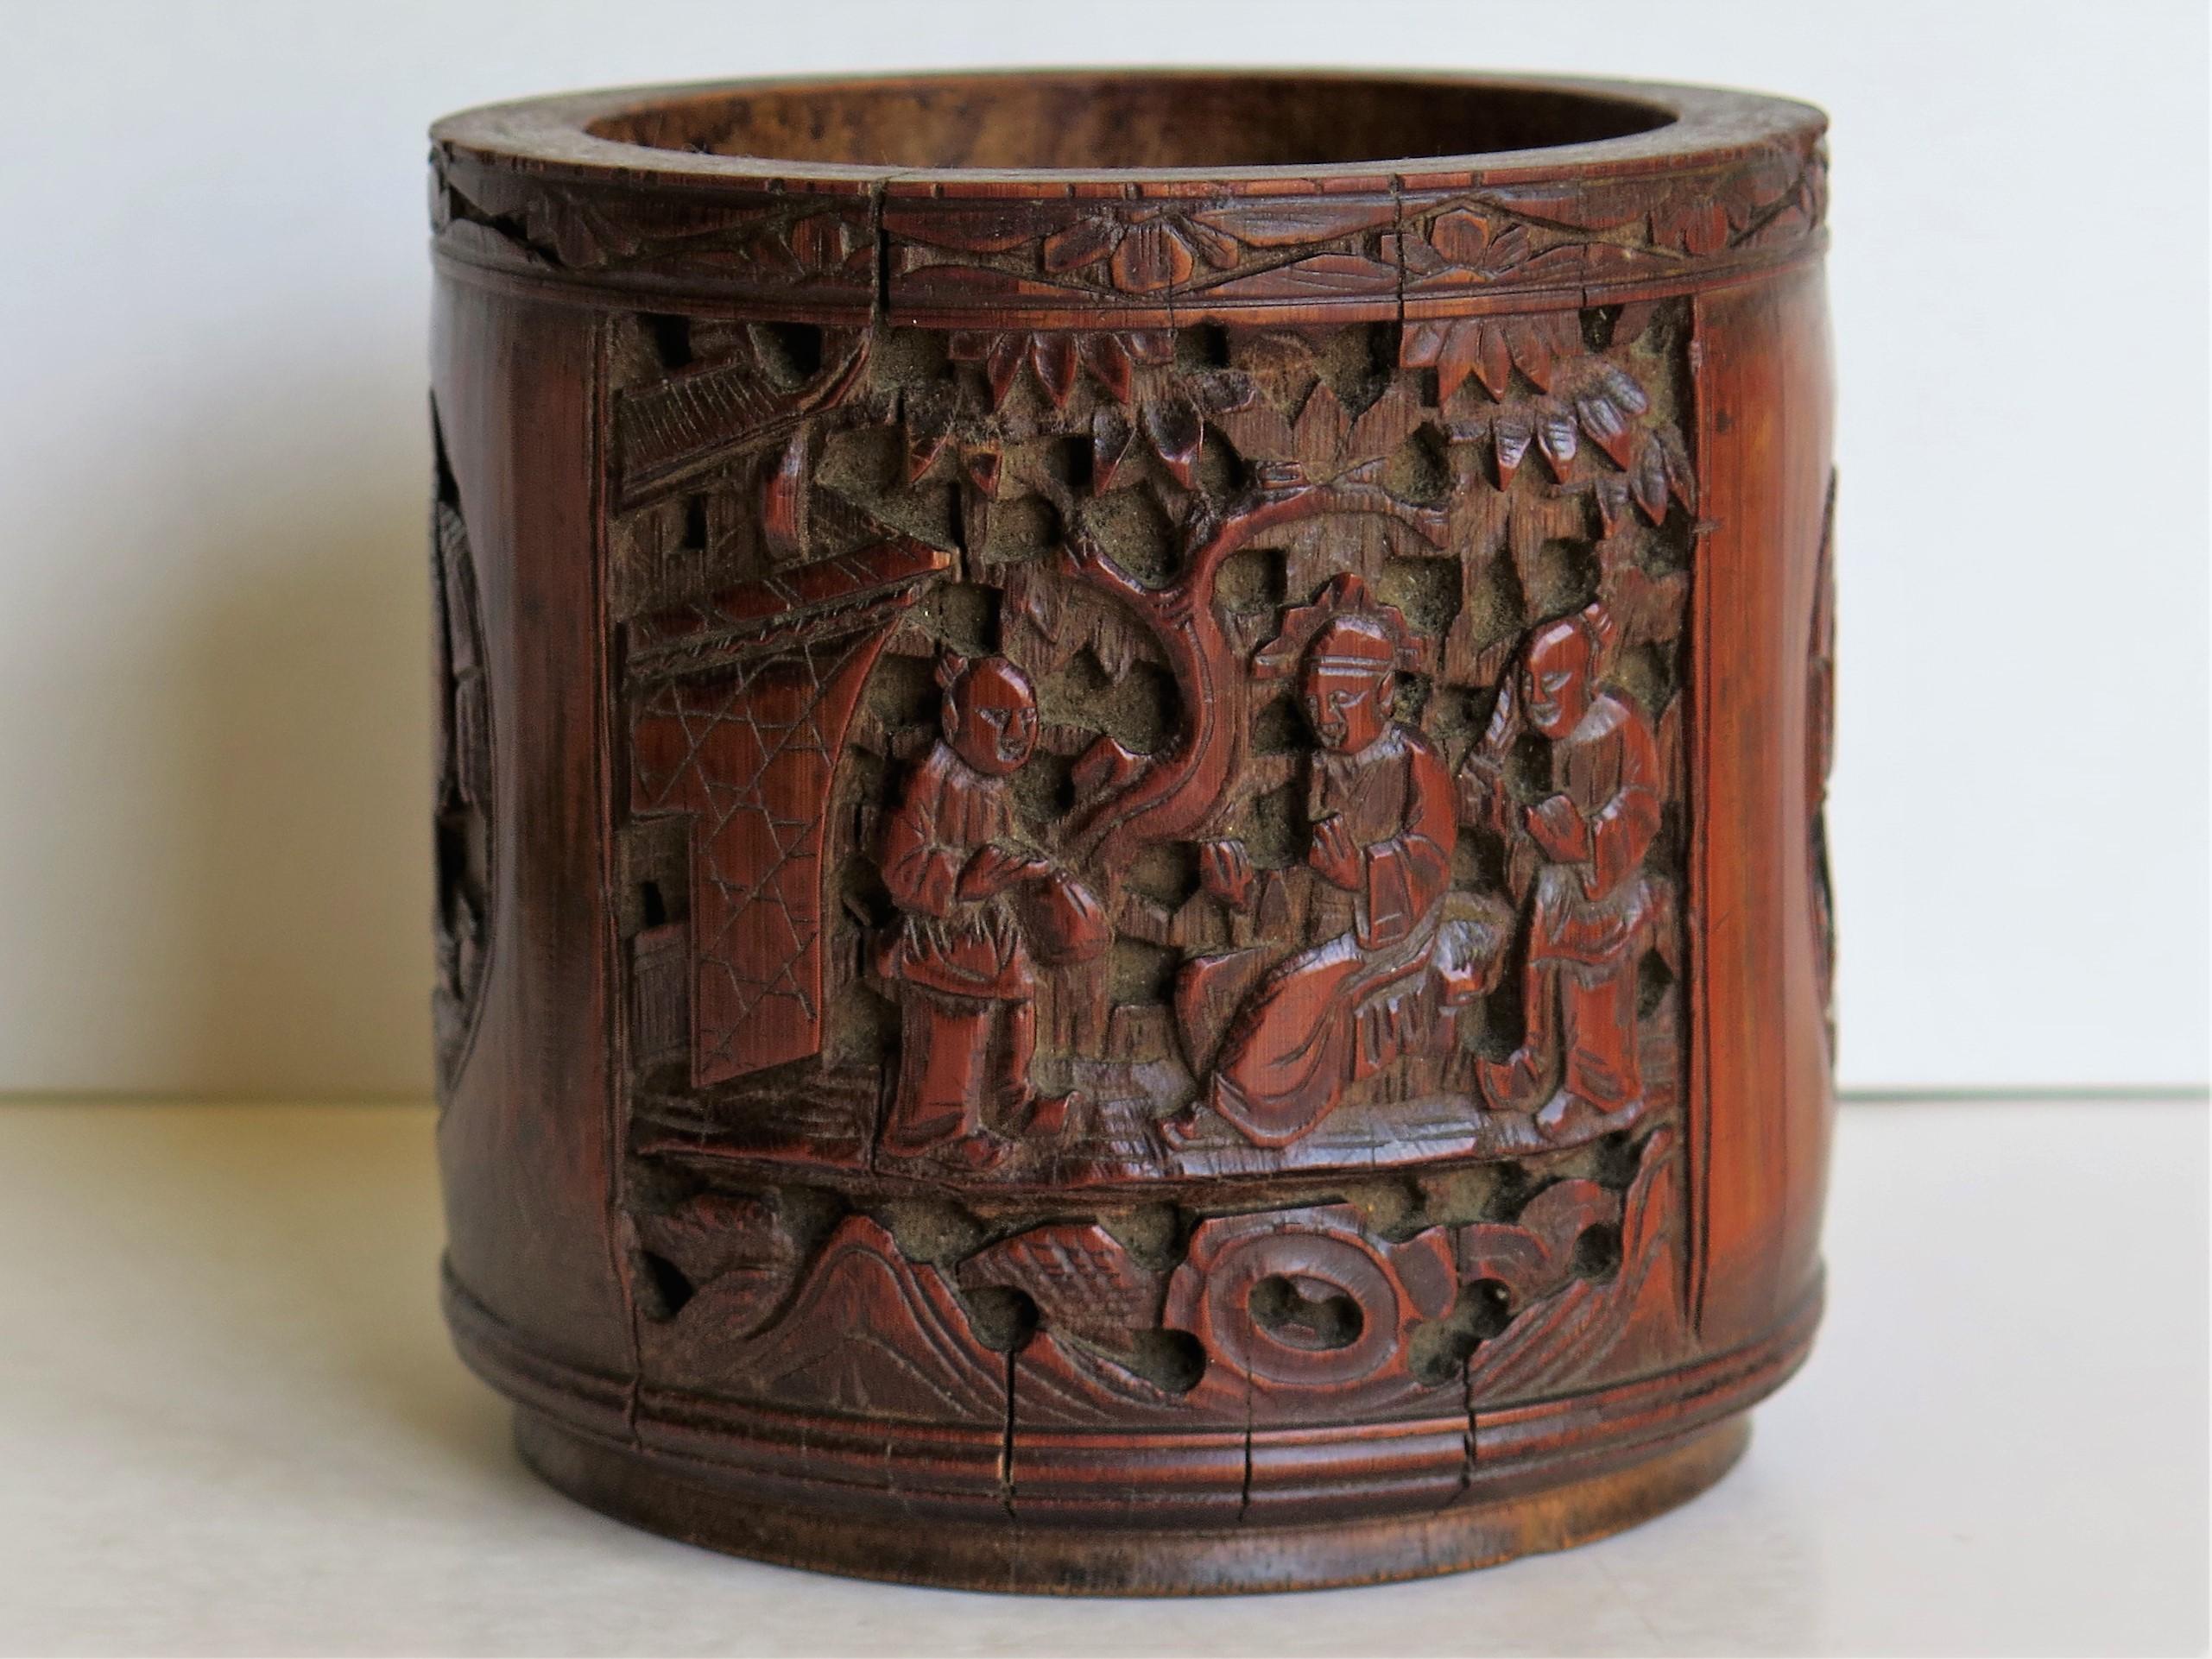 This is a finely hand-carved Chinese bamboo scholars Brush Pot or bitong which we date to the early 19th century of the Qing dynasty, circa 1830, but could be earlier.

The bamboo has been intricately hand-carved in four different alternating